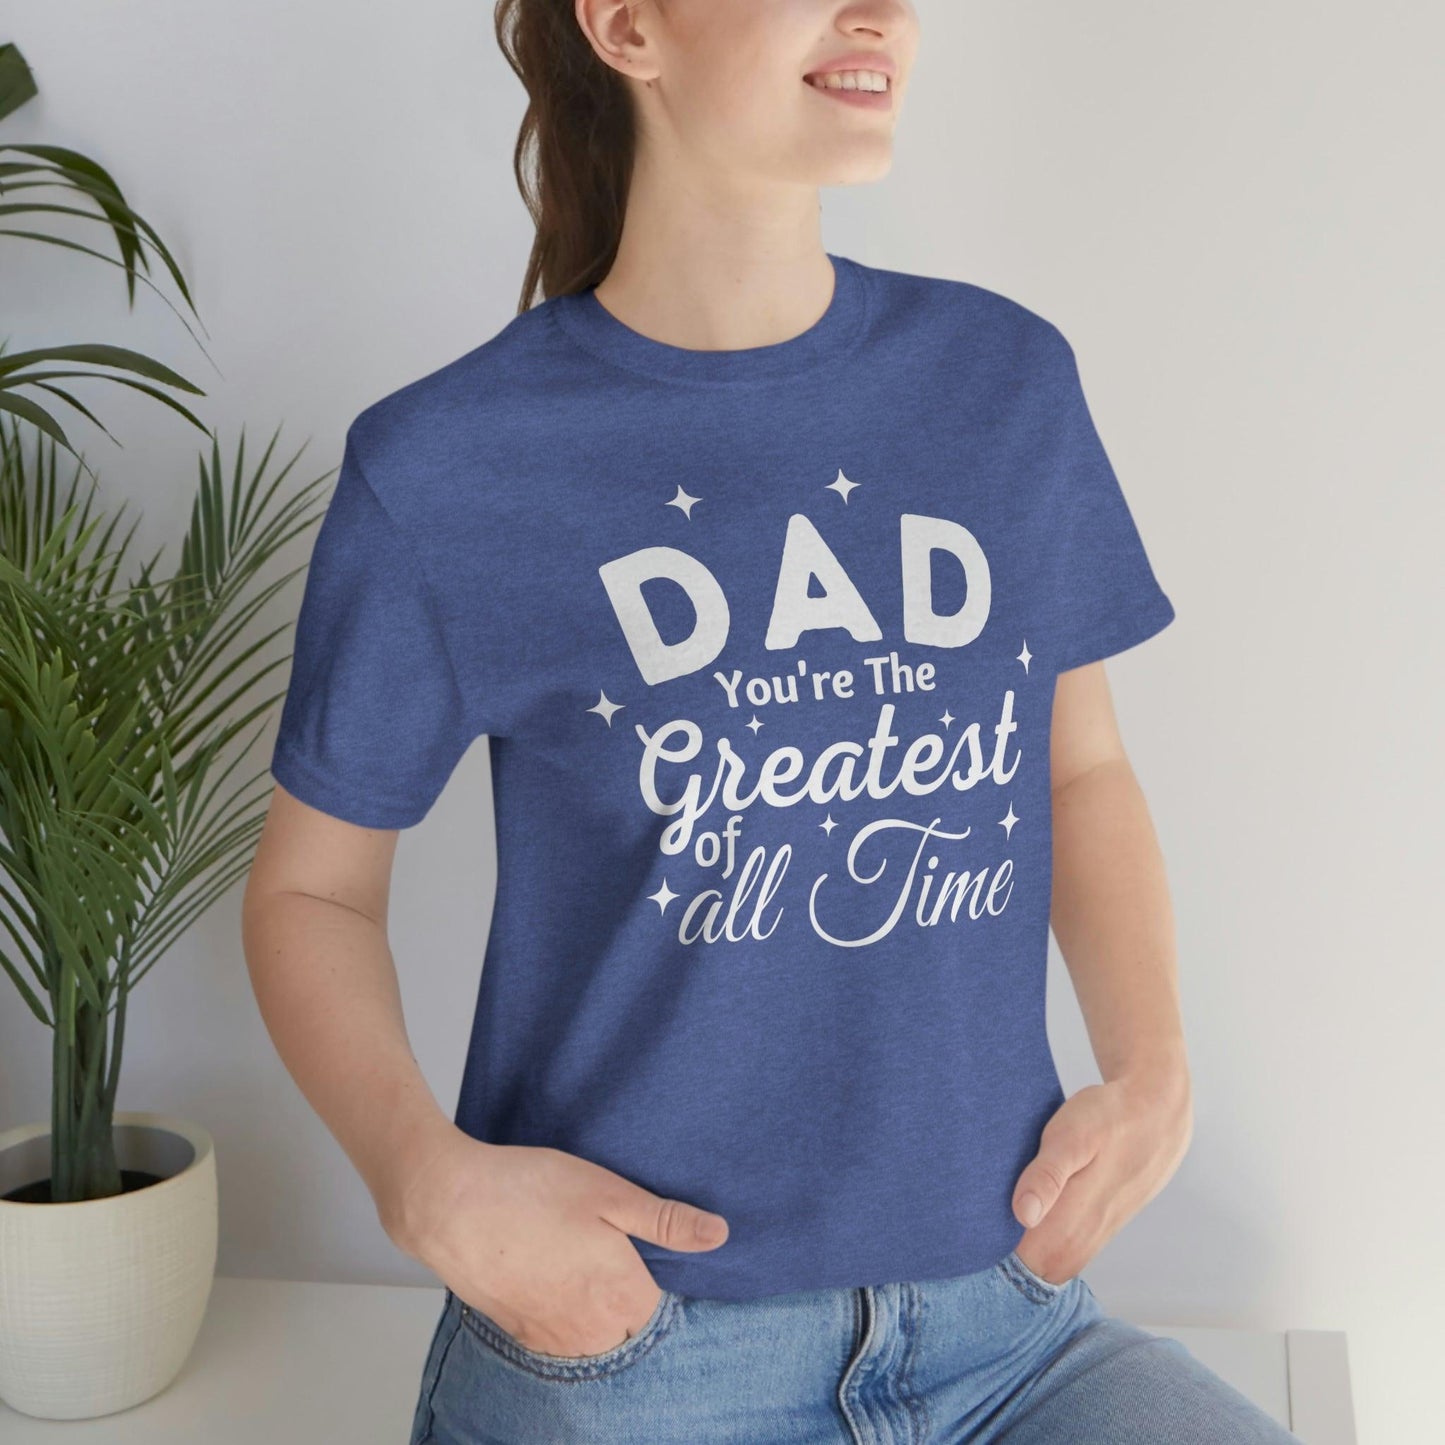 Dad Gift - Best Dad Gift - Dad You're the Greatest of all time Shirt - Dad Shirt - Funny Fathers Gift Dad Birthday Gift